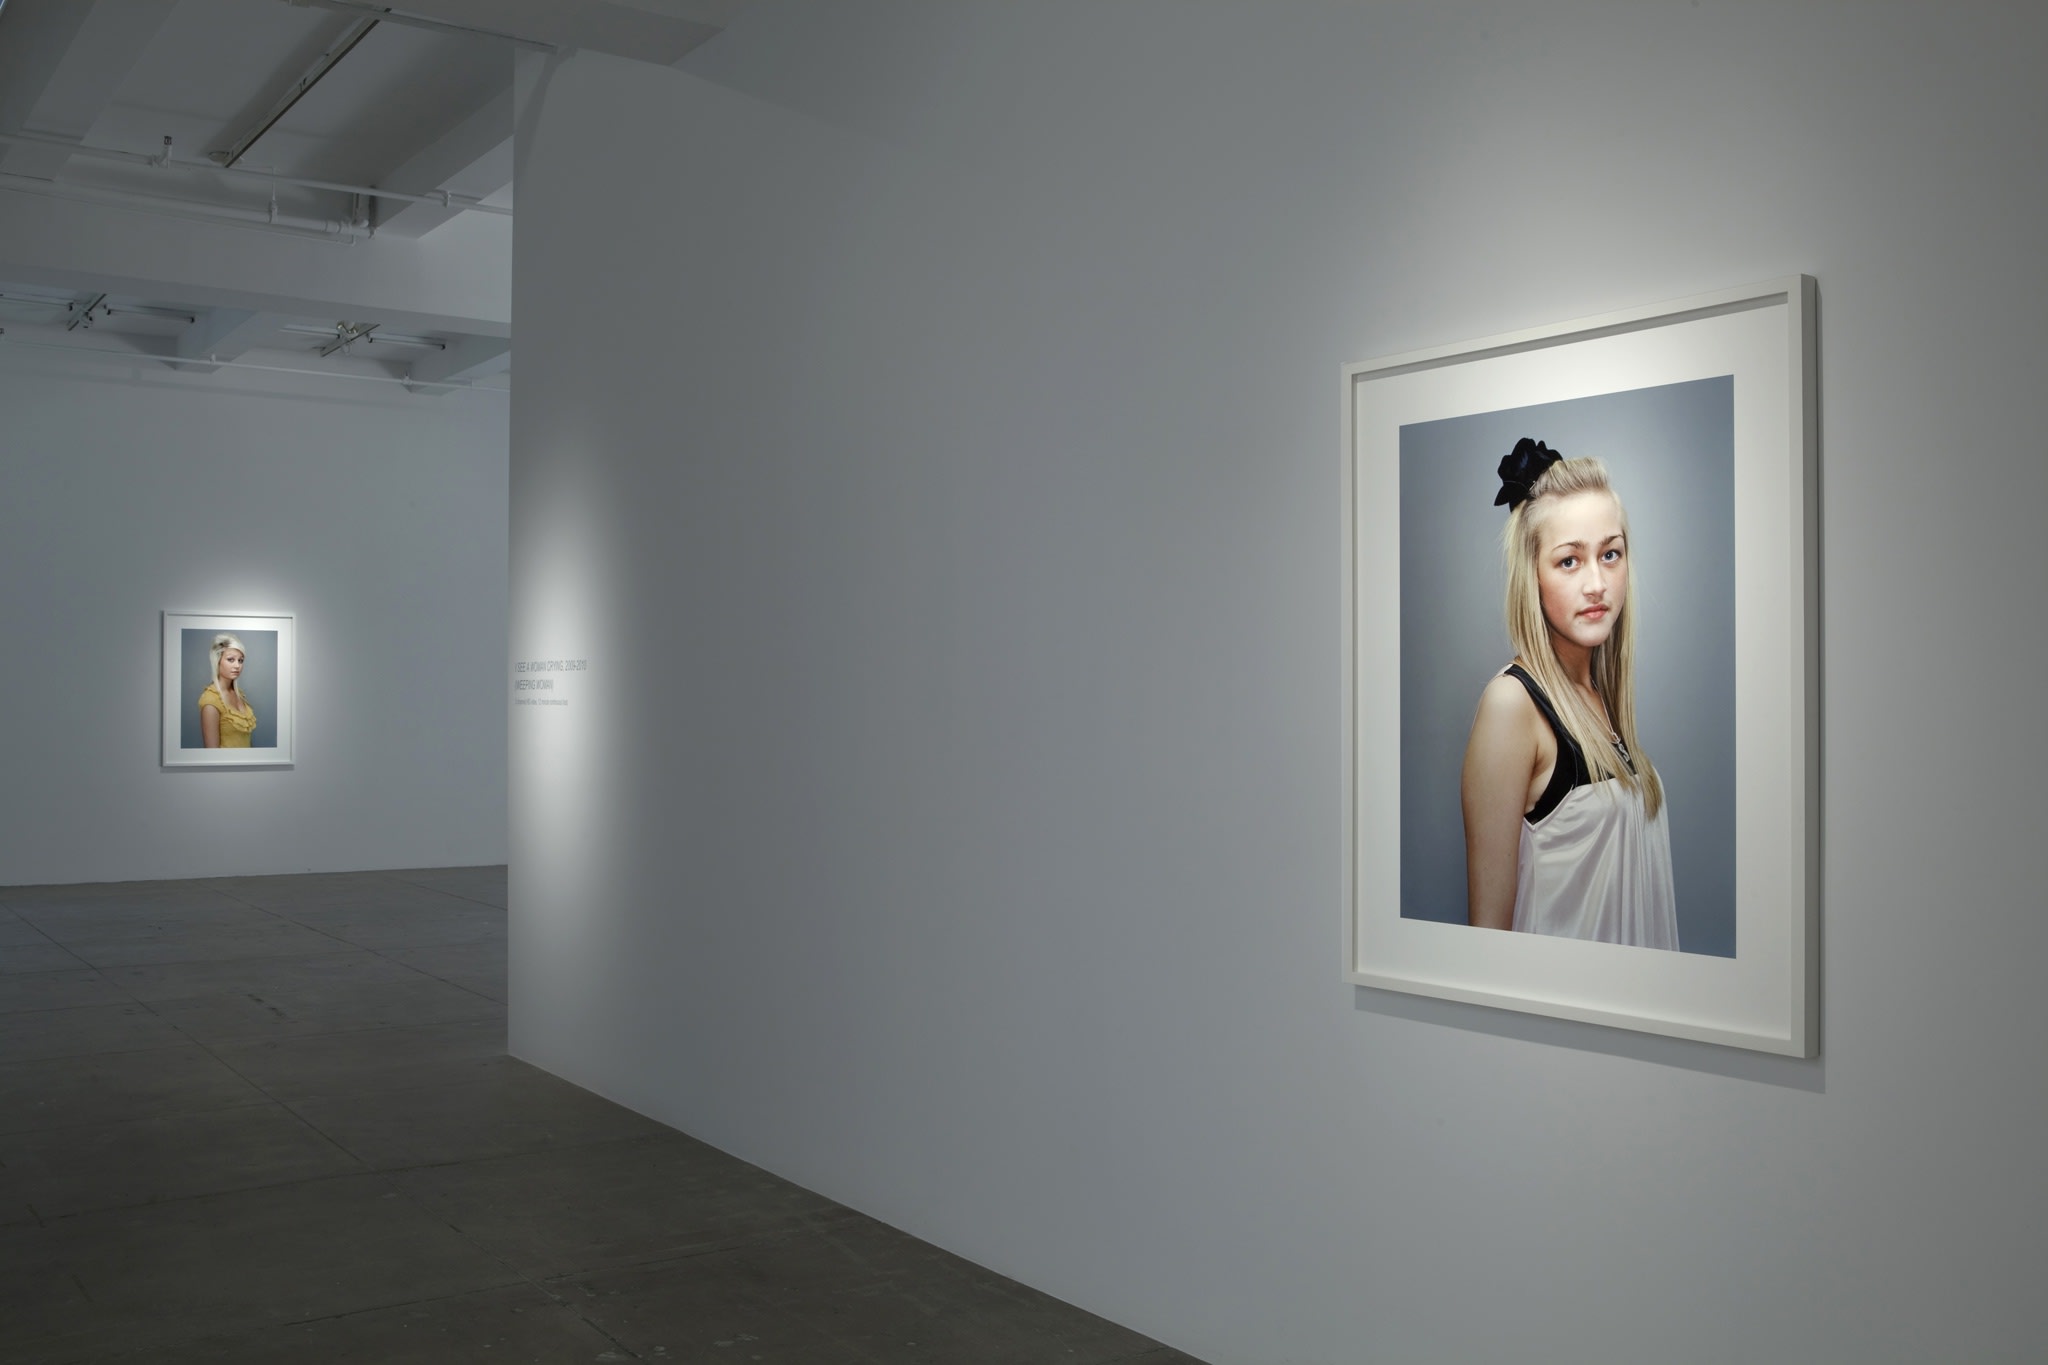 On a white wall, the portrait of a young woman, with blonde hair and blue eyes, wearing a white top with black straps, hangs. In the background, on another wall, a portait shows a woman wearing a yellow top.